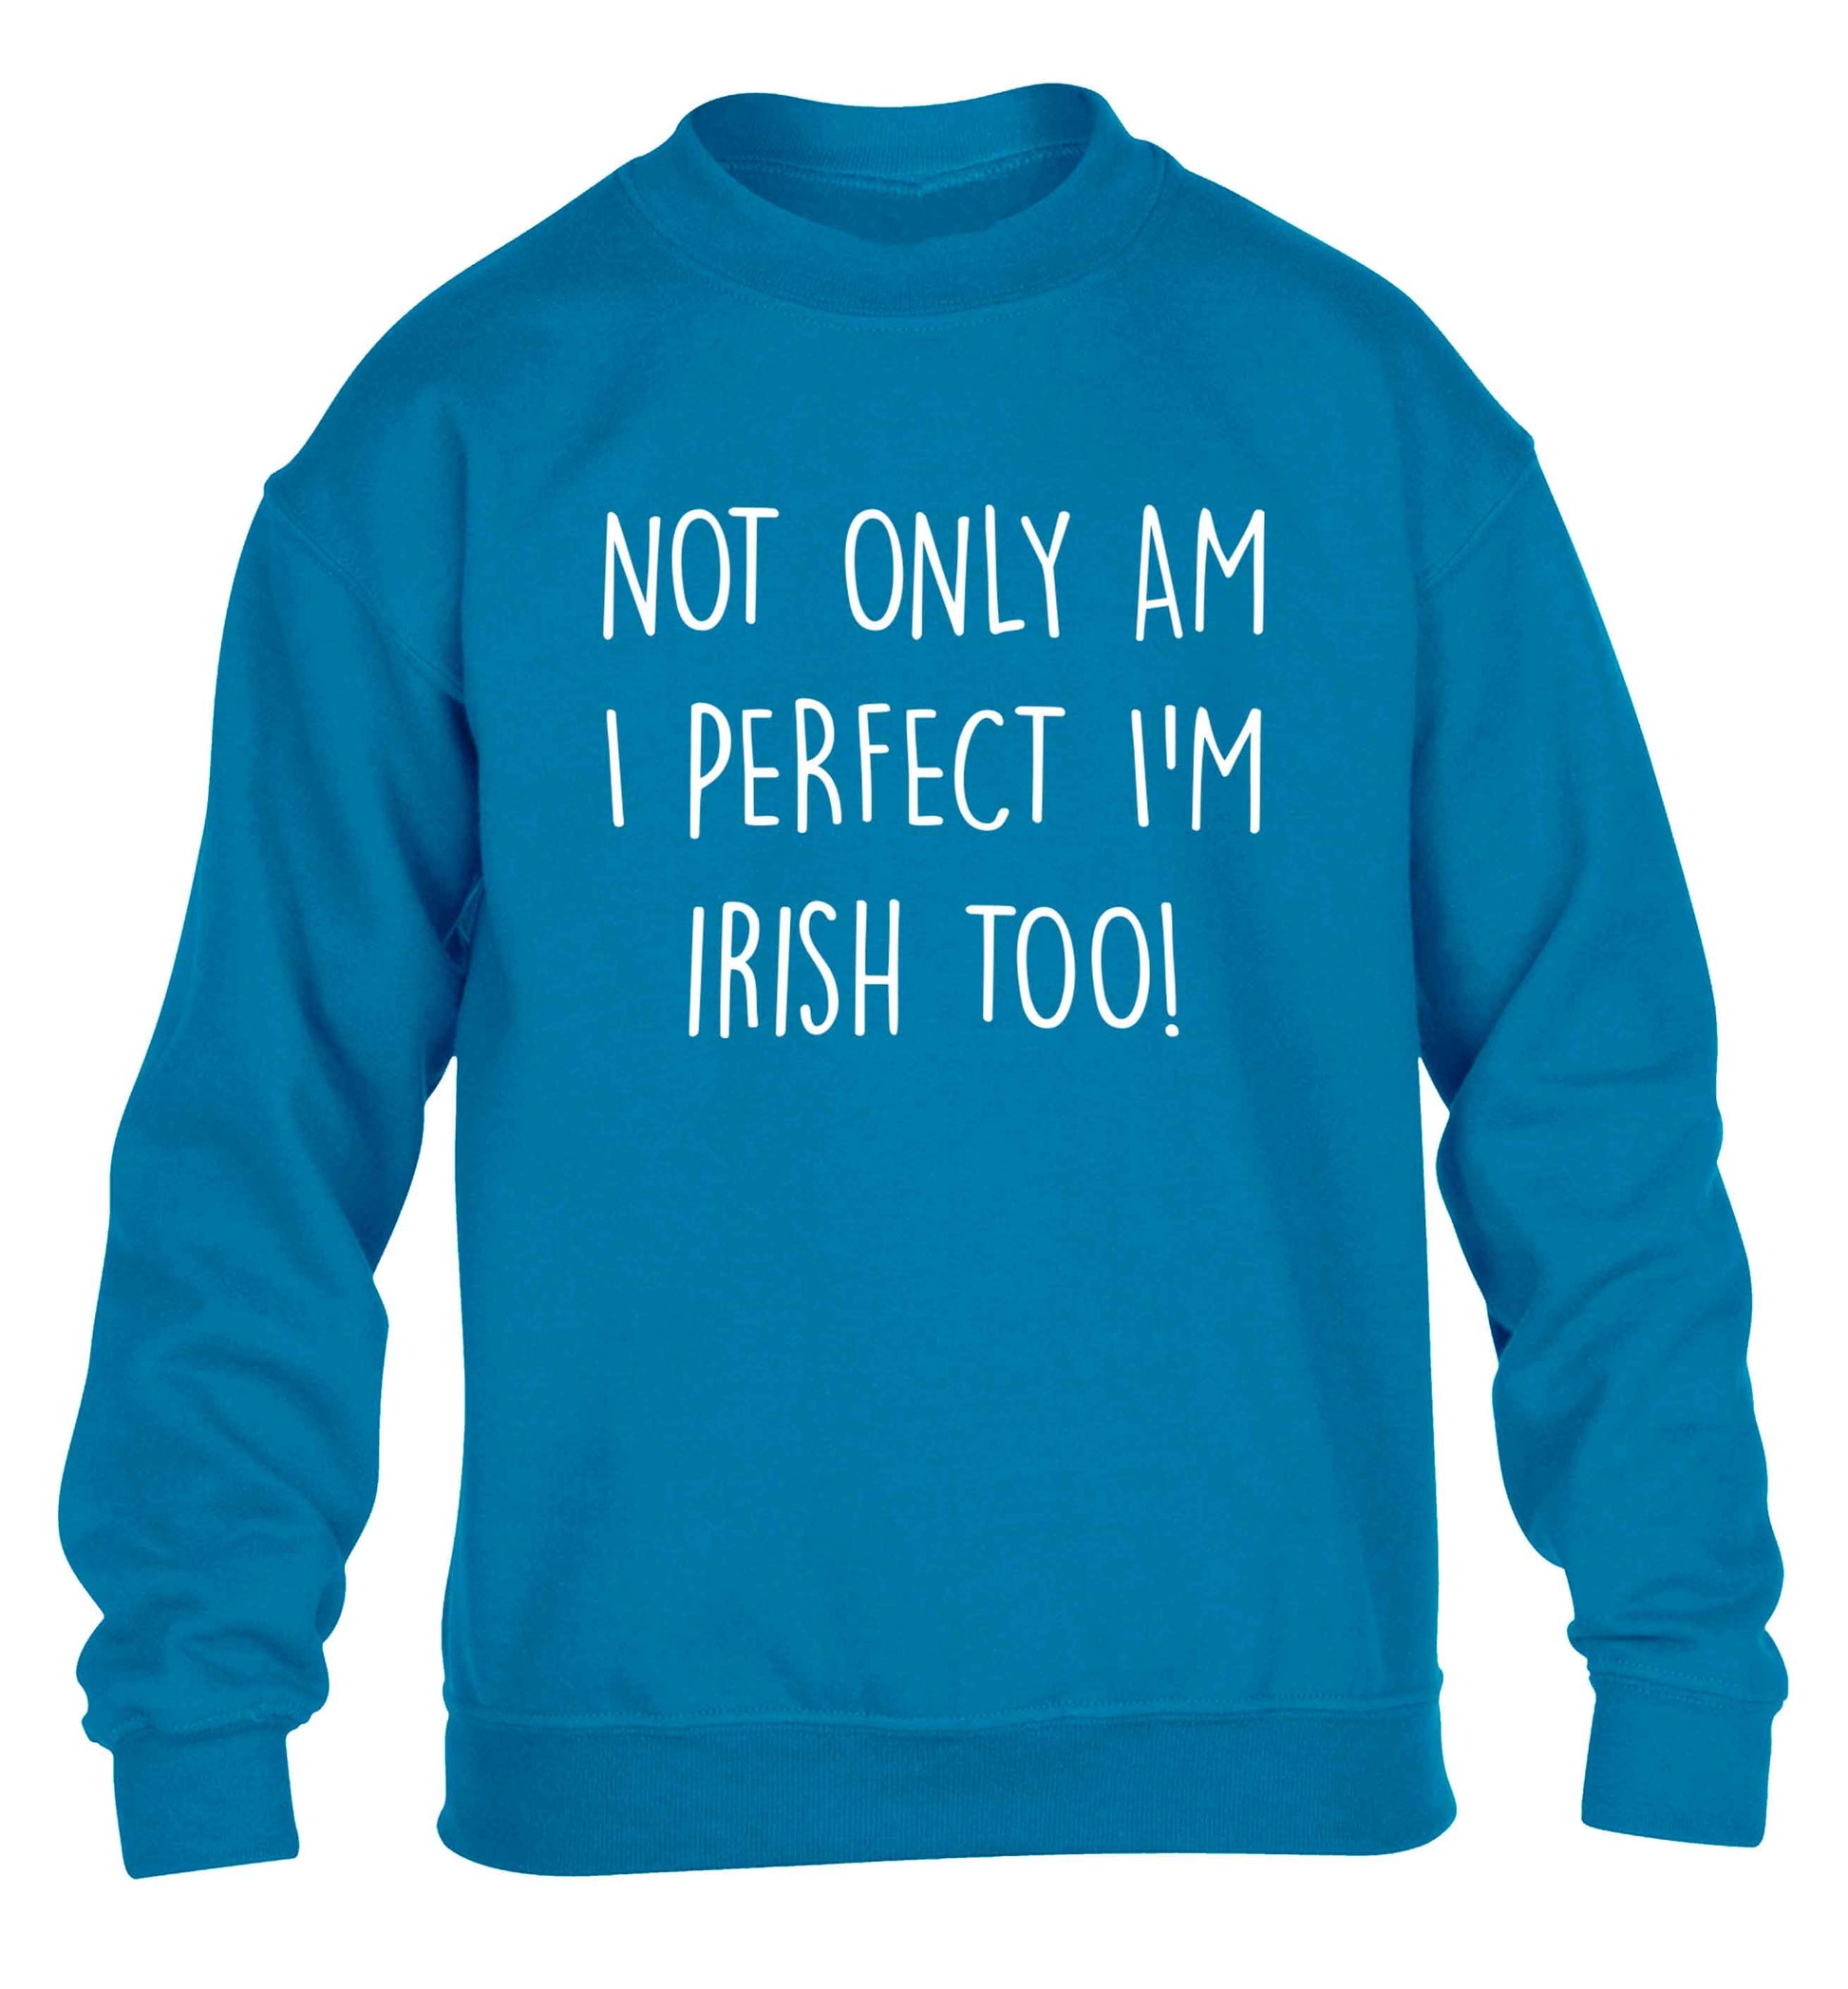 Not only am I perfect I'm Irish too! children's blue sweater 12-13 Years